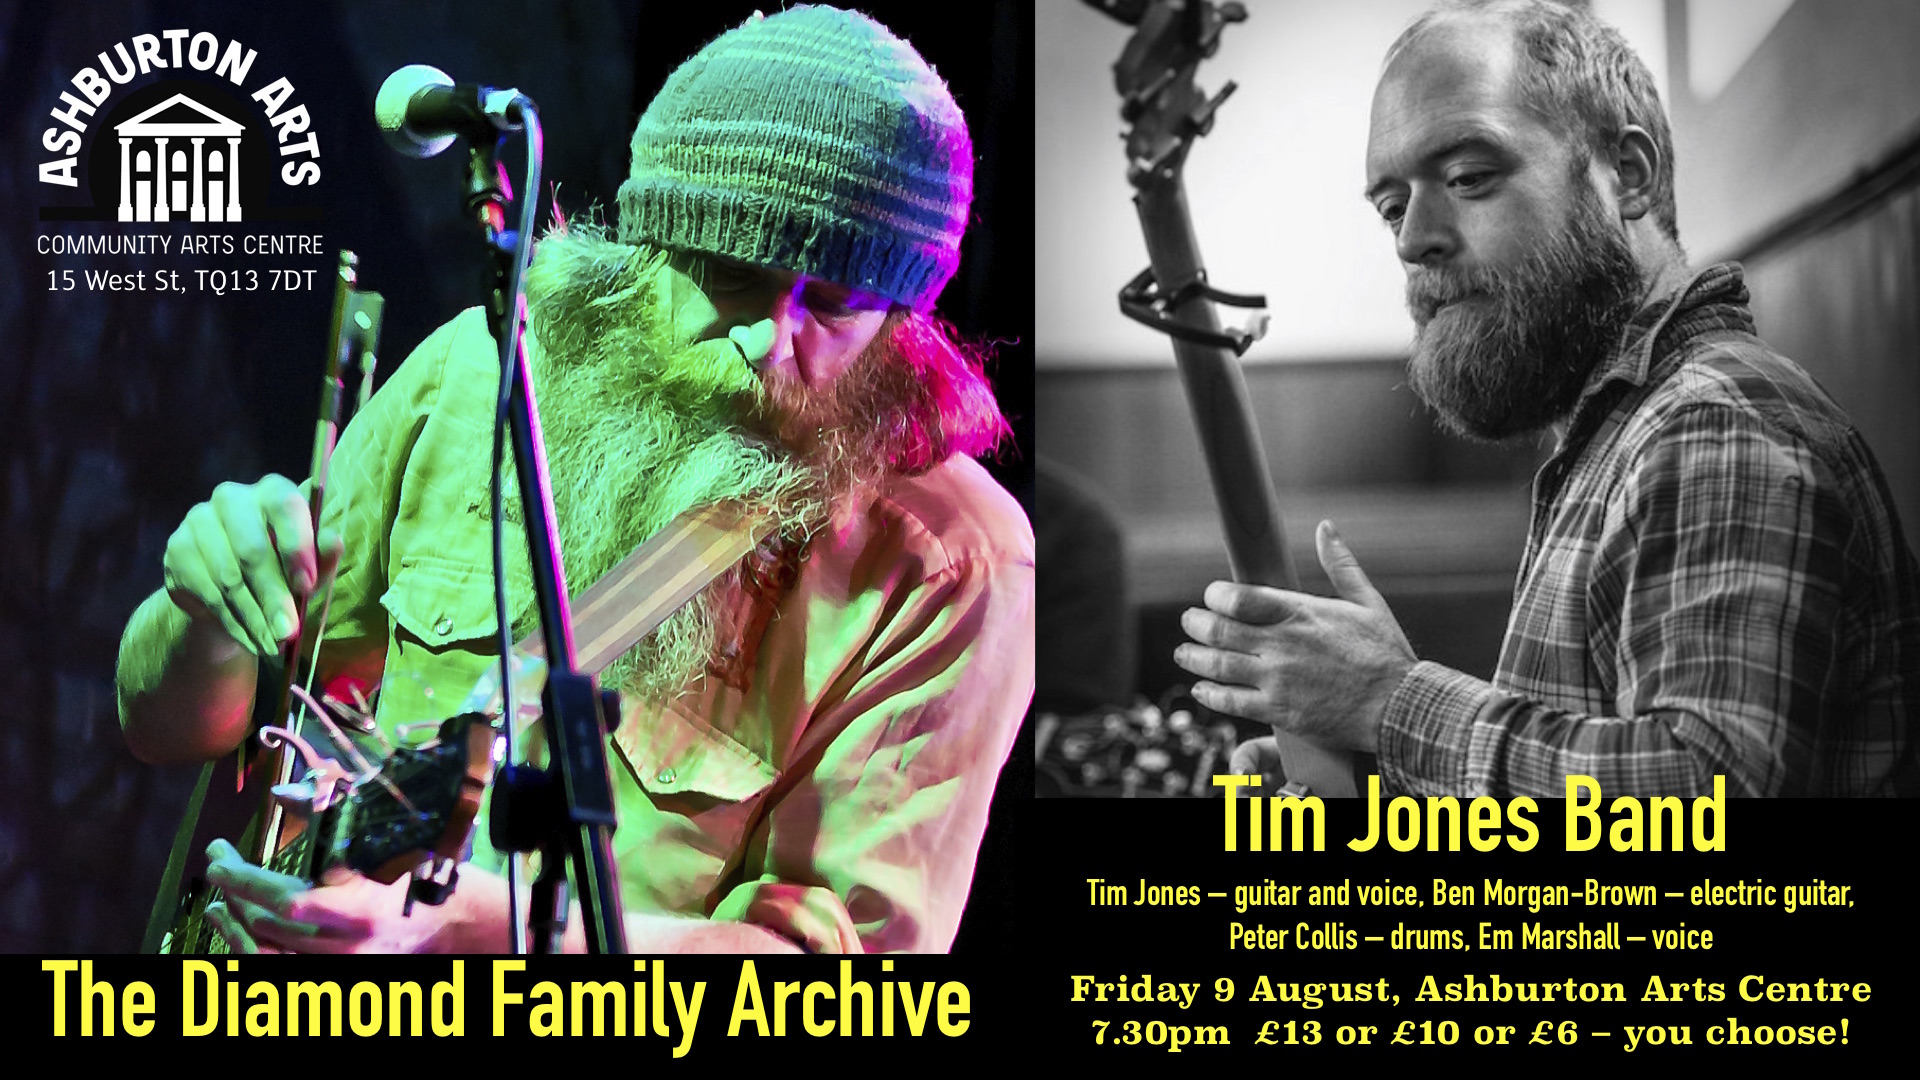 The Diamond Family Archive, with Tim Jones Band (and Ben Morgan-Brown)